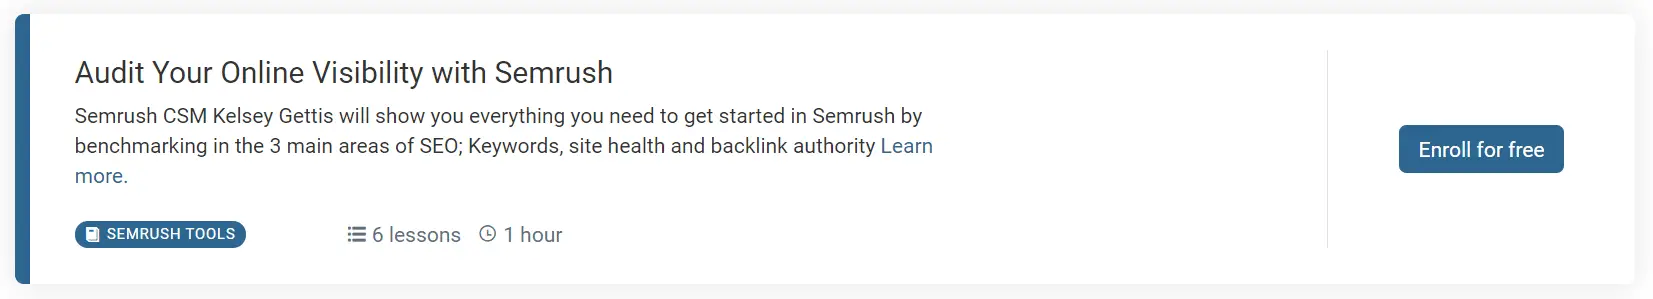 Audit Your Online Visibility with SEMrush